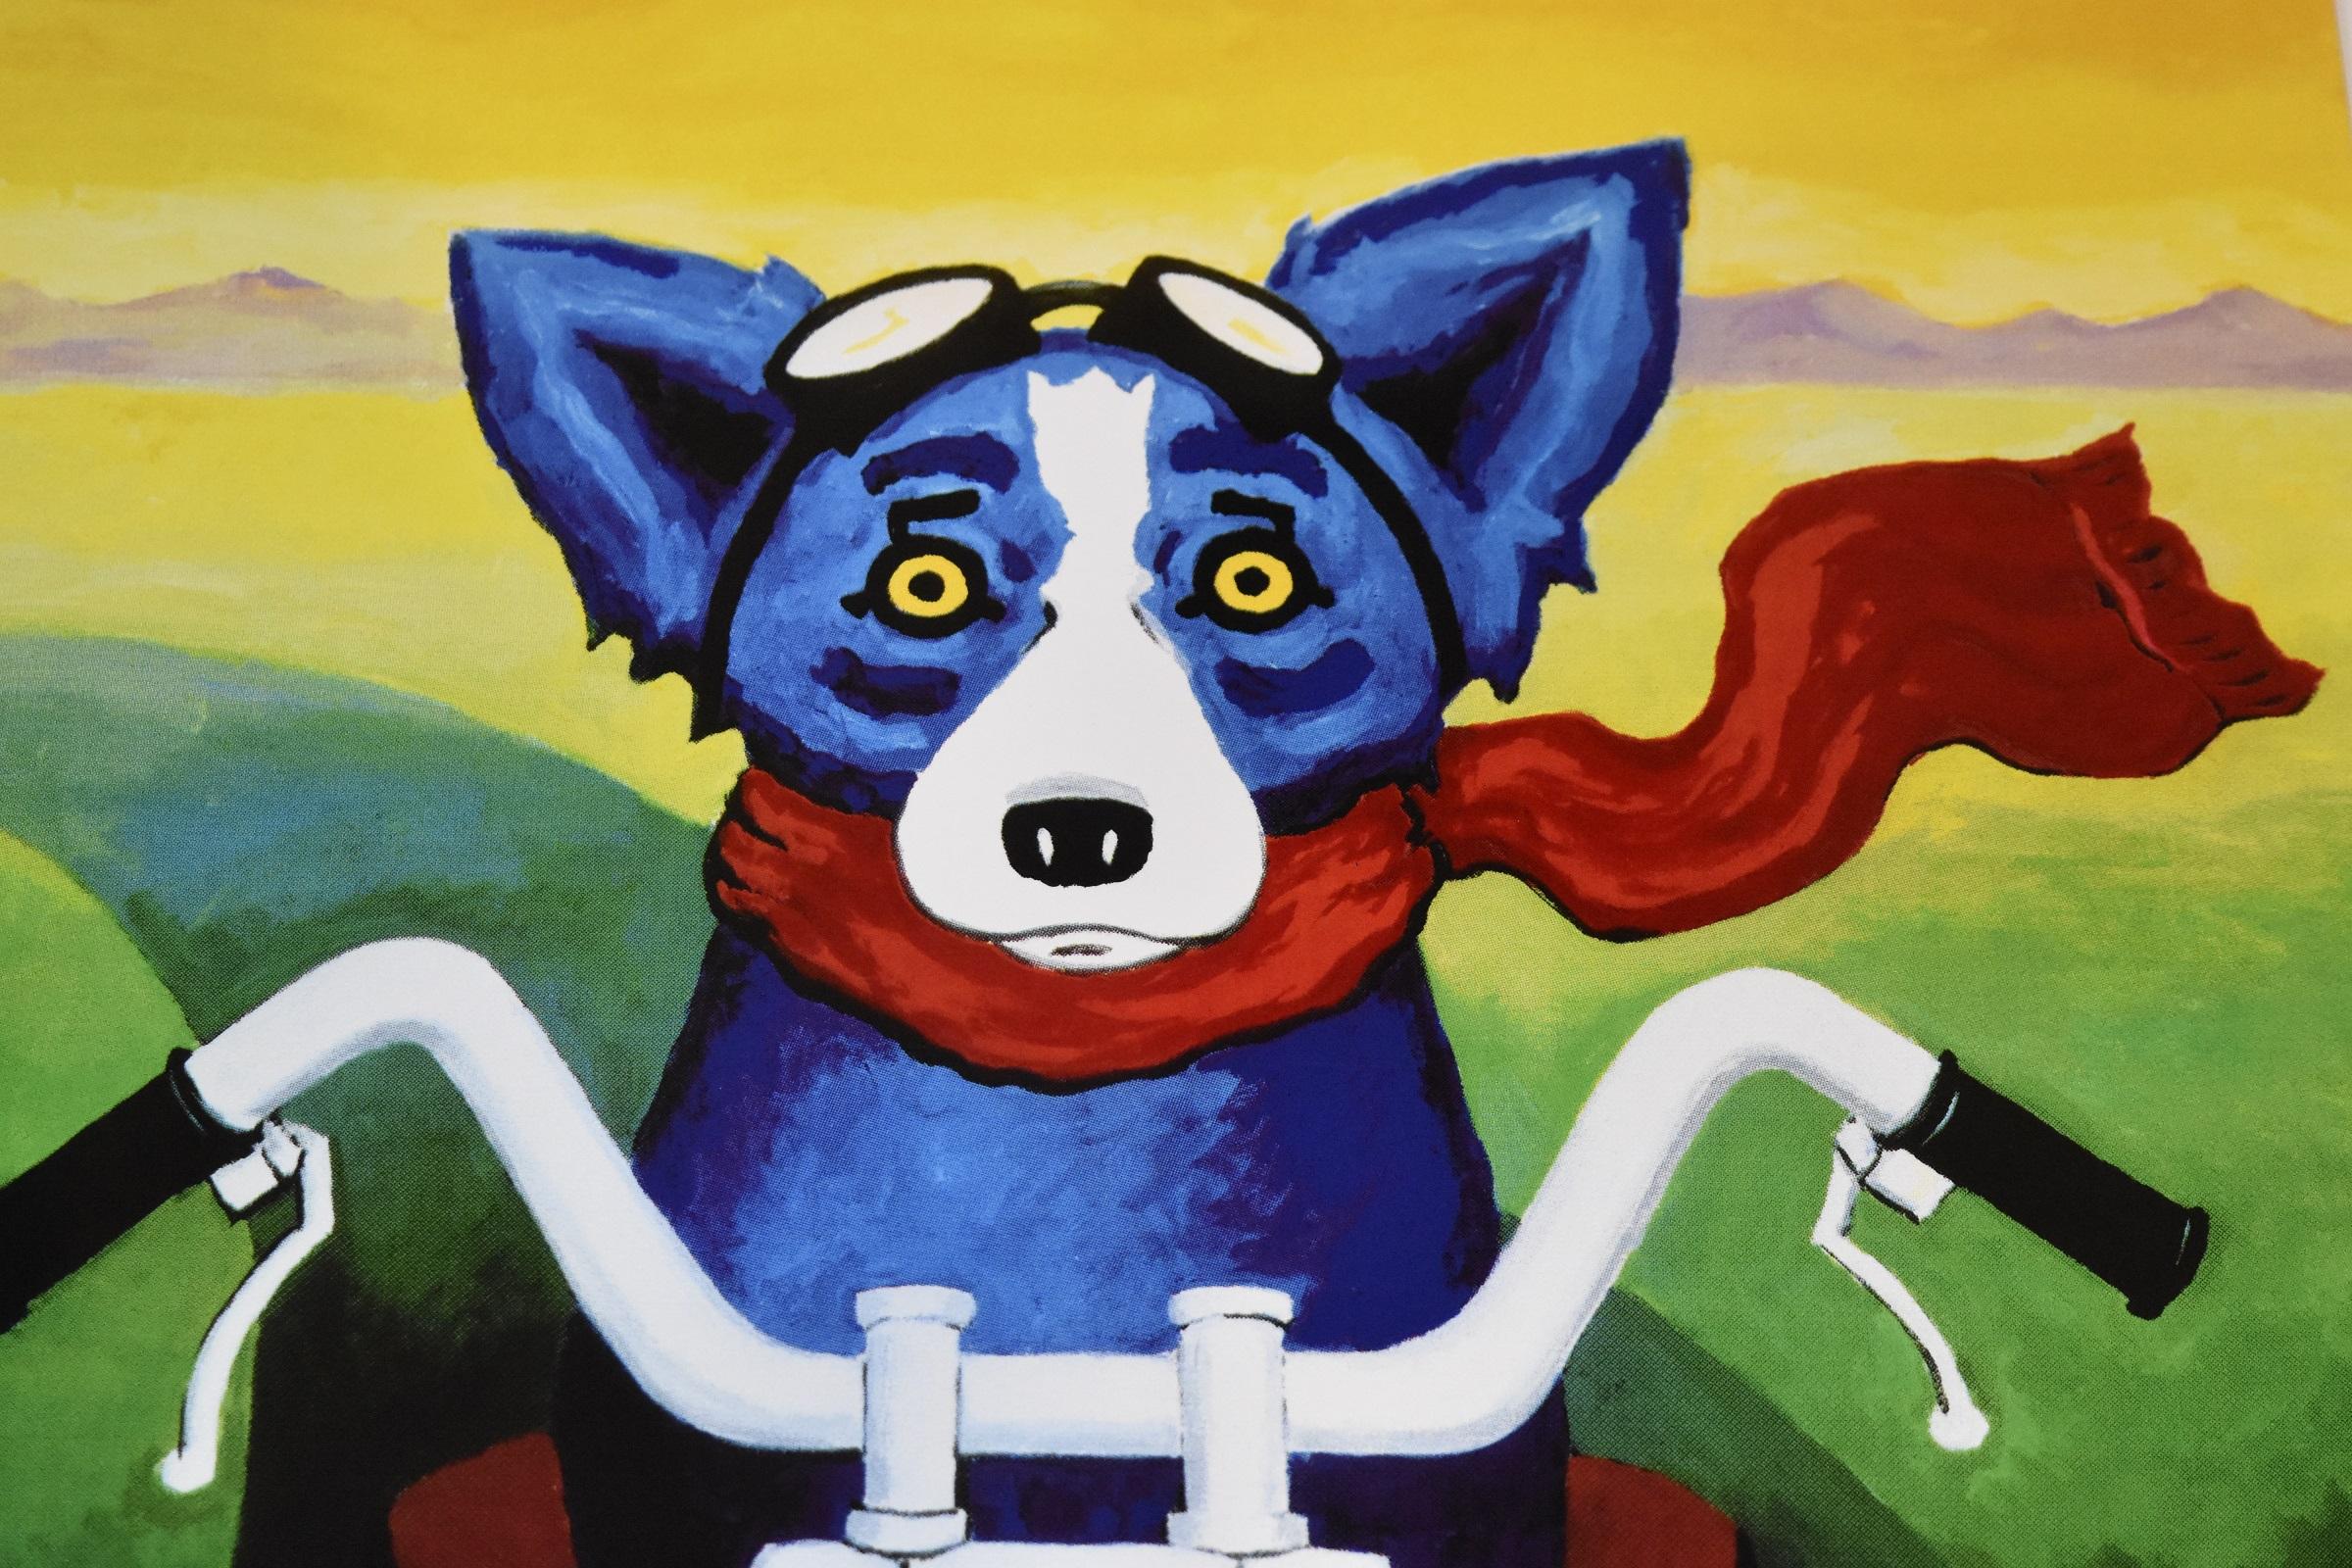 This Blue Dog work consists of one blue dog sitting on a motorcycle sporting a red scarf around its neck. There is also scenery of mountains in brown and green coloring. The dog has soulful yellow eyes.  This pop art animal original silkscreen print